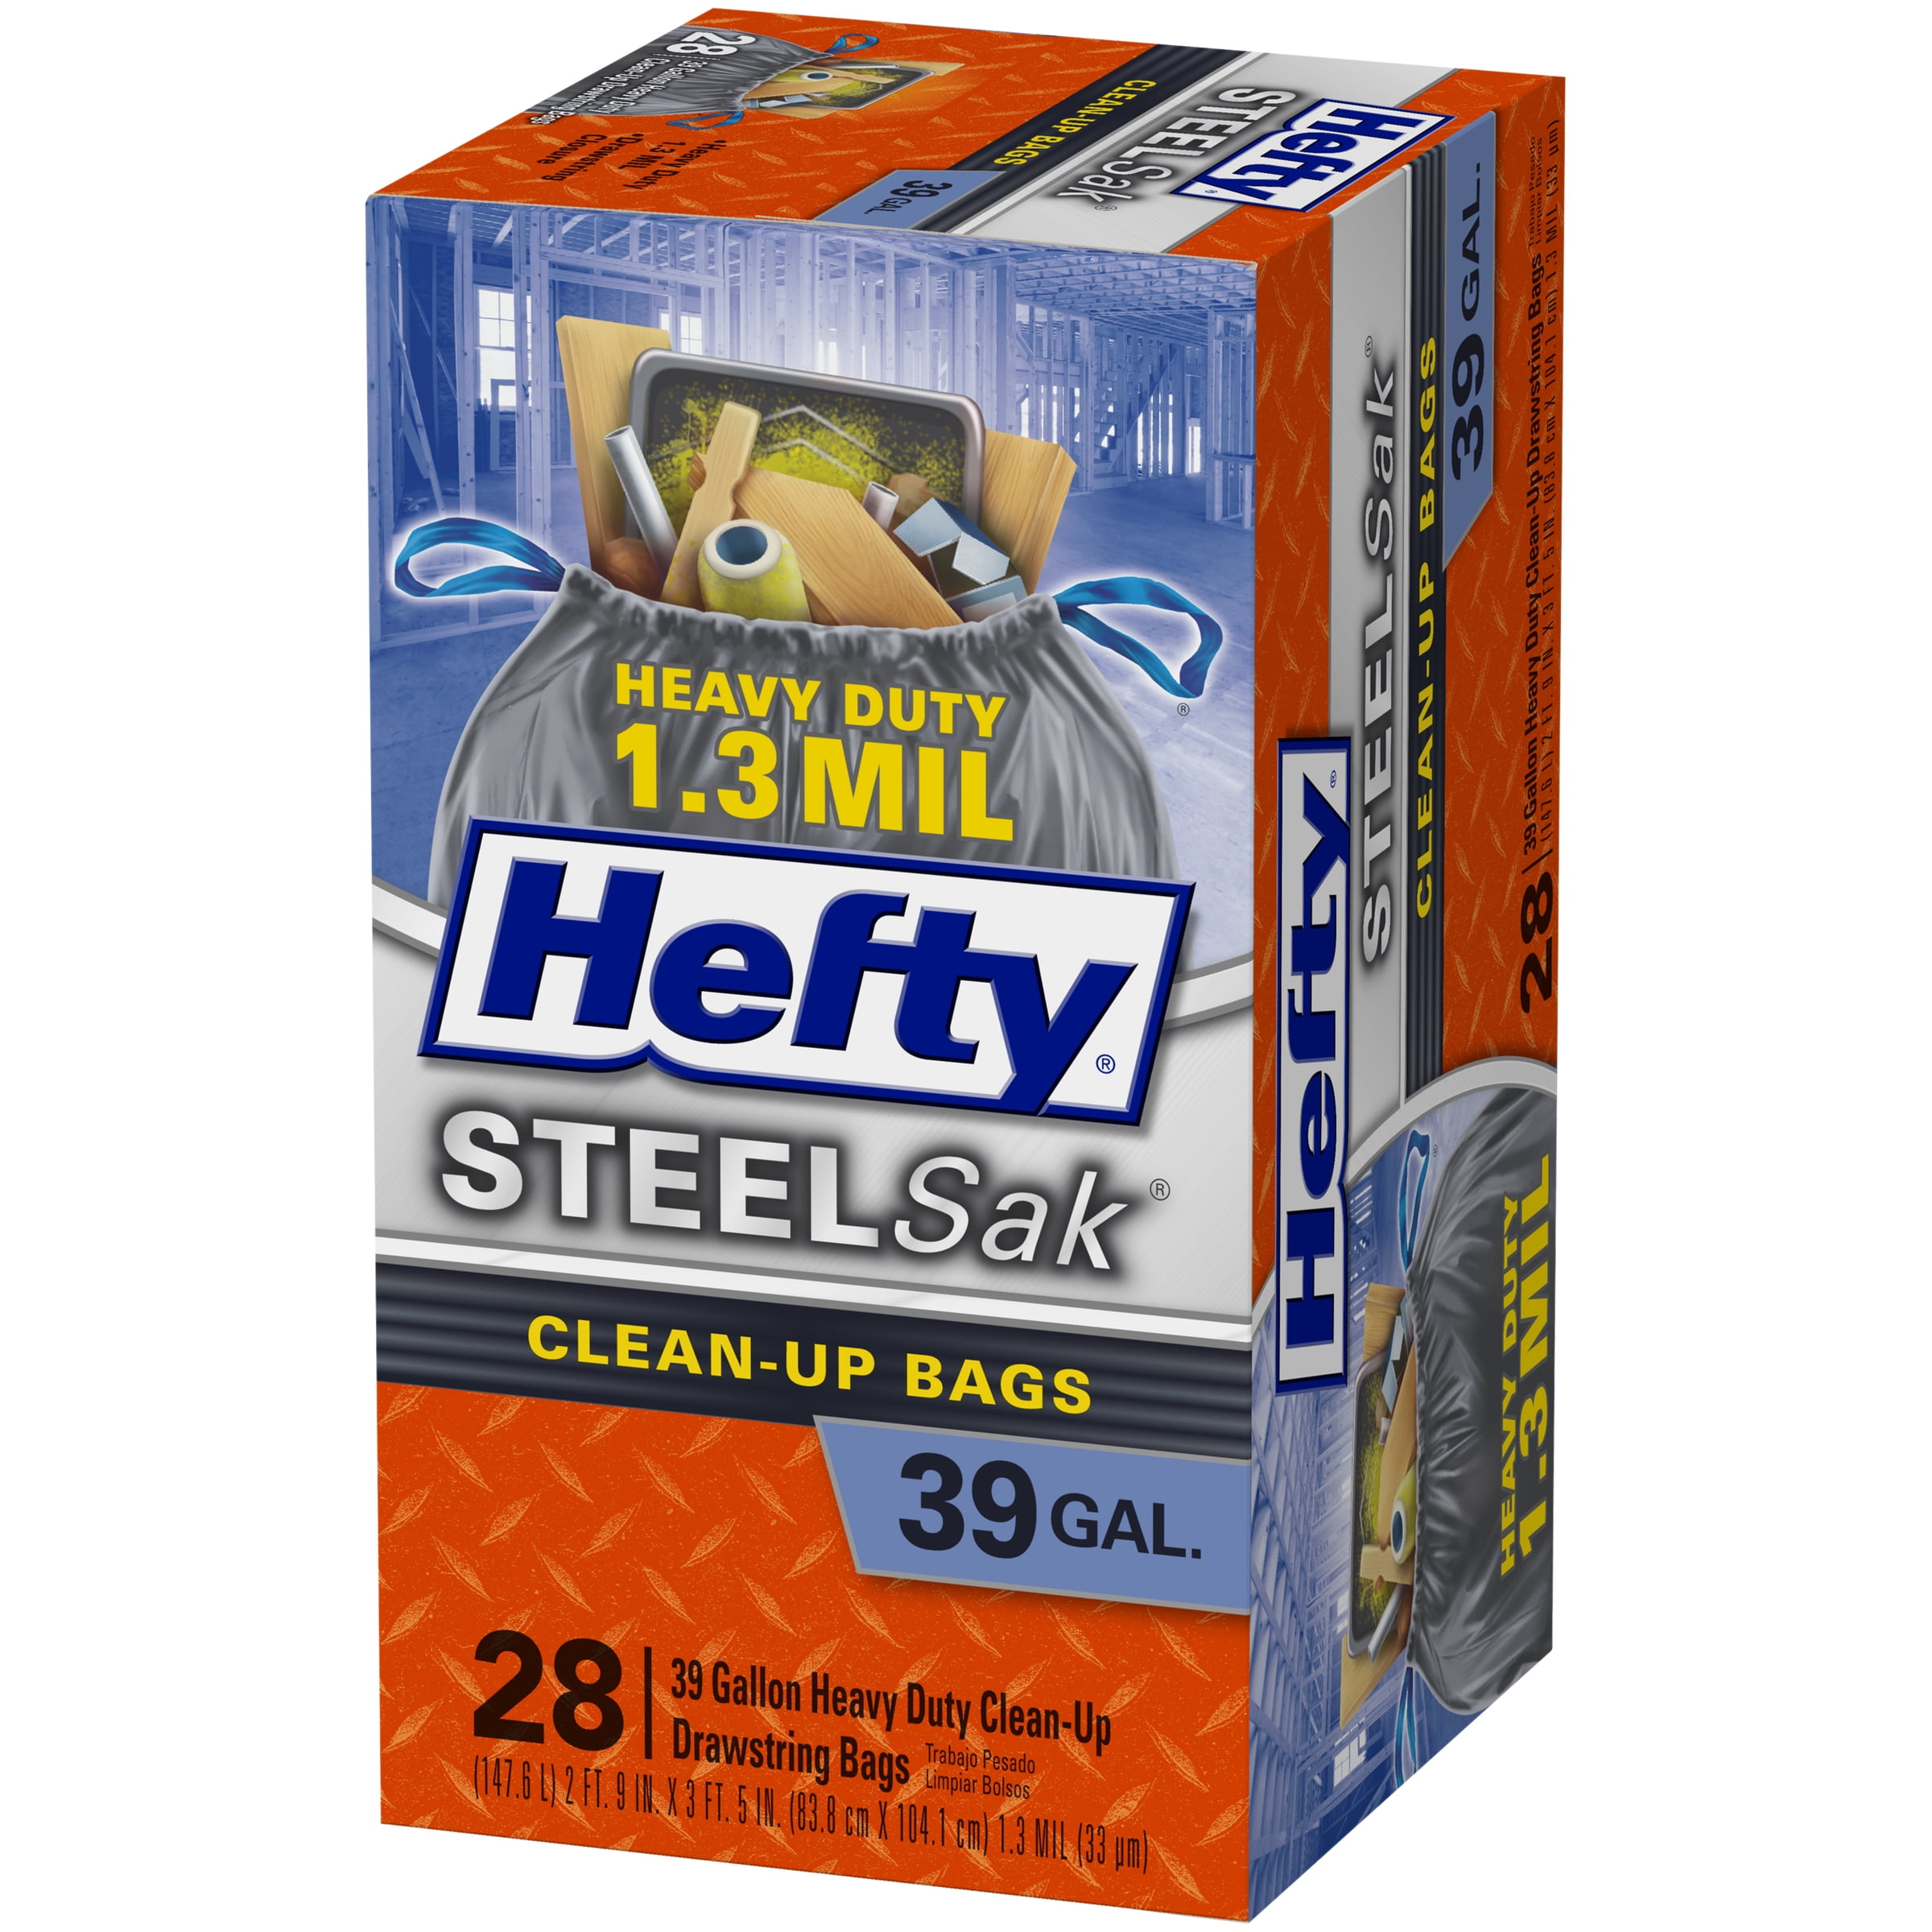  Reliable1st Code K Heavy Duty Trash Bags for 9-12